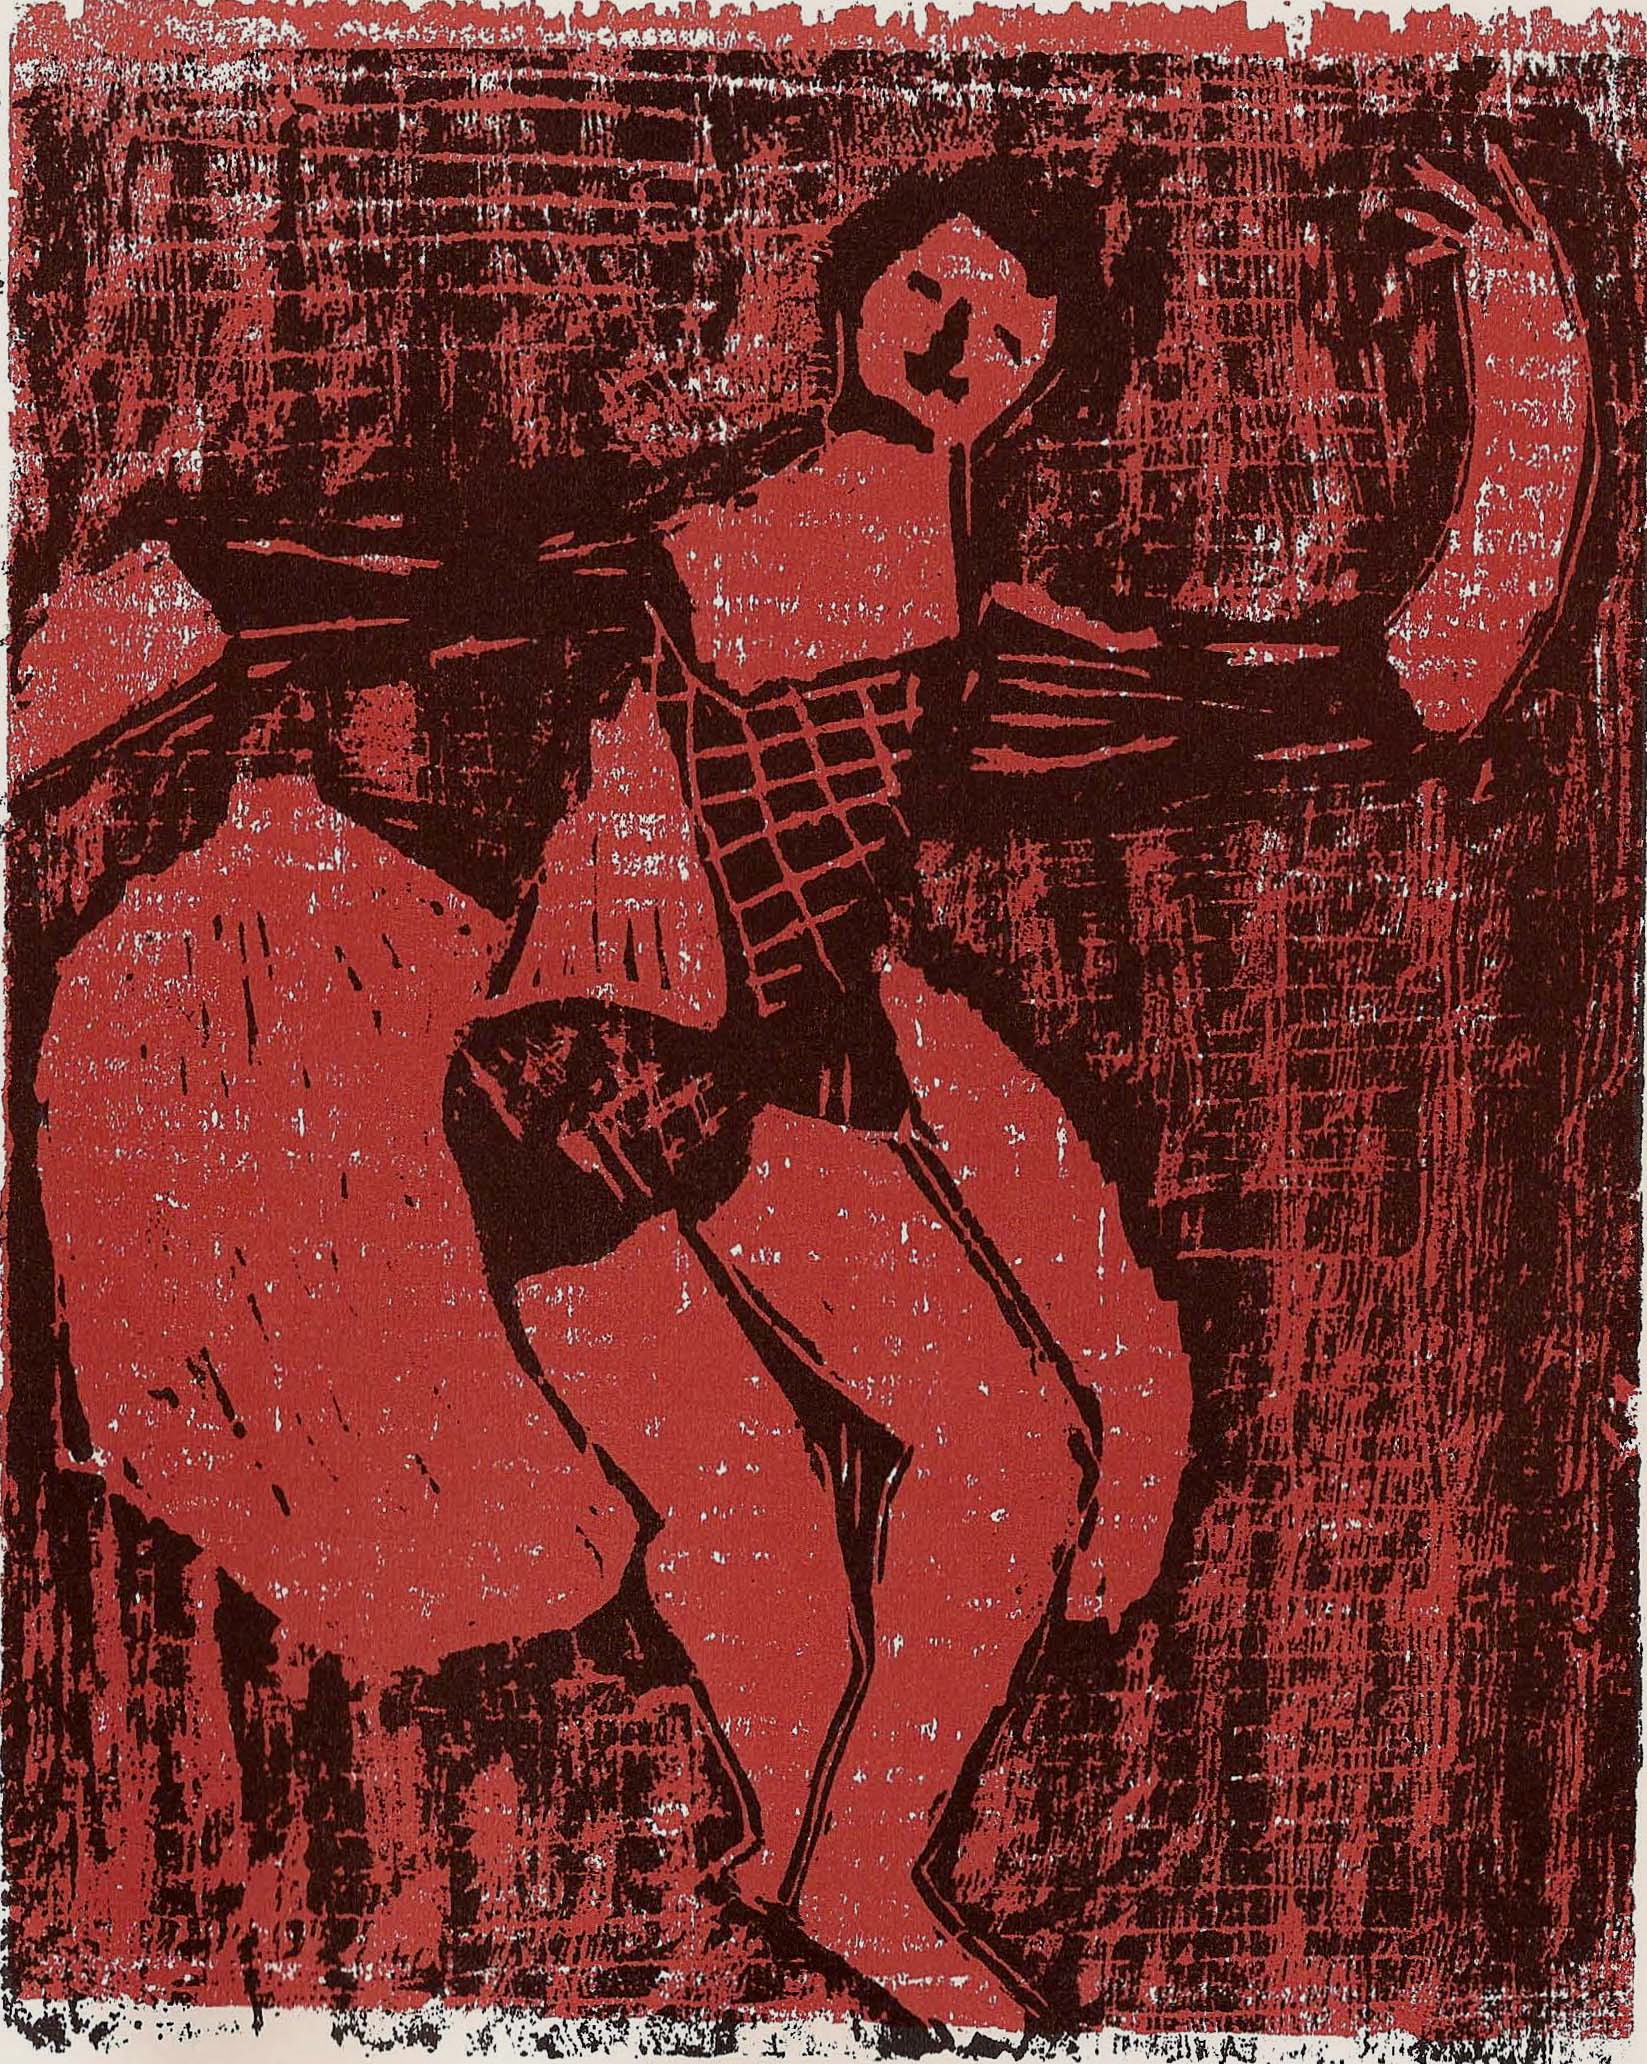 Dancer in Red by Milton Avery